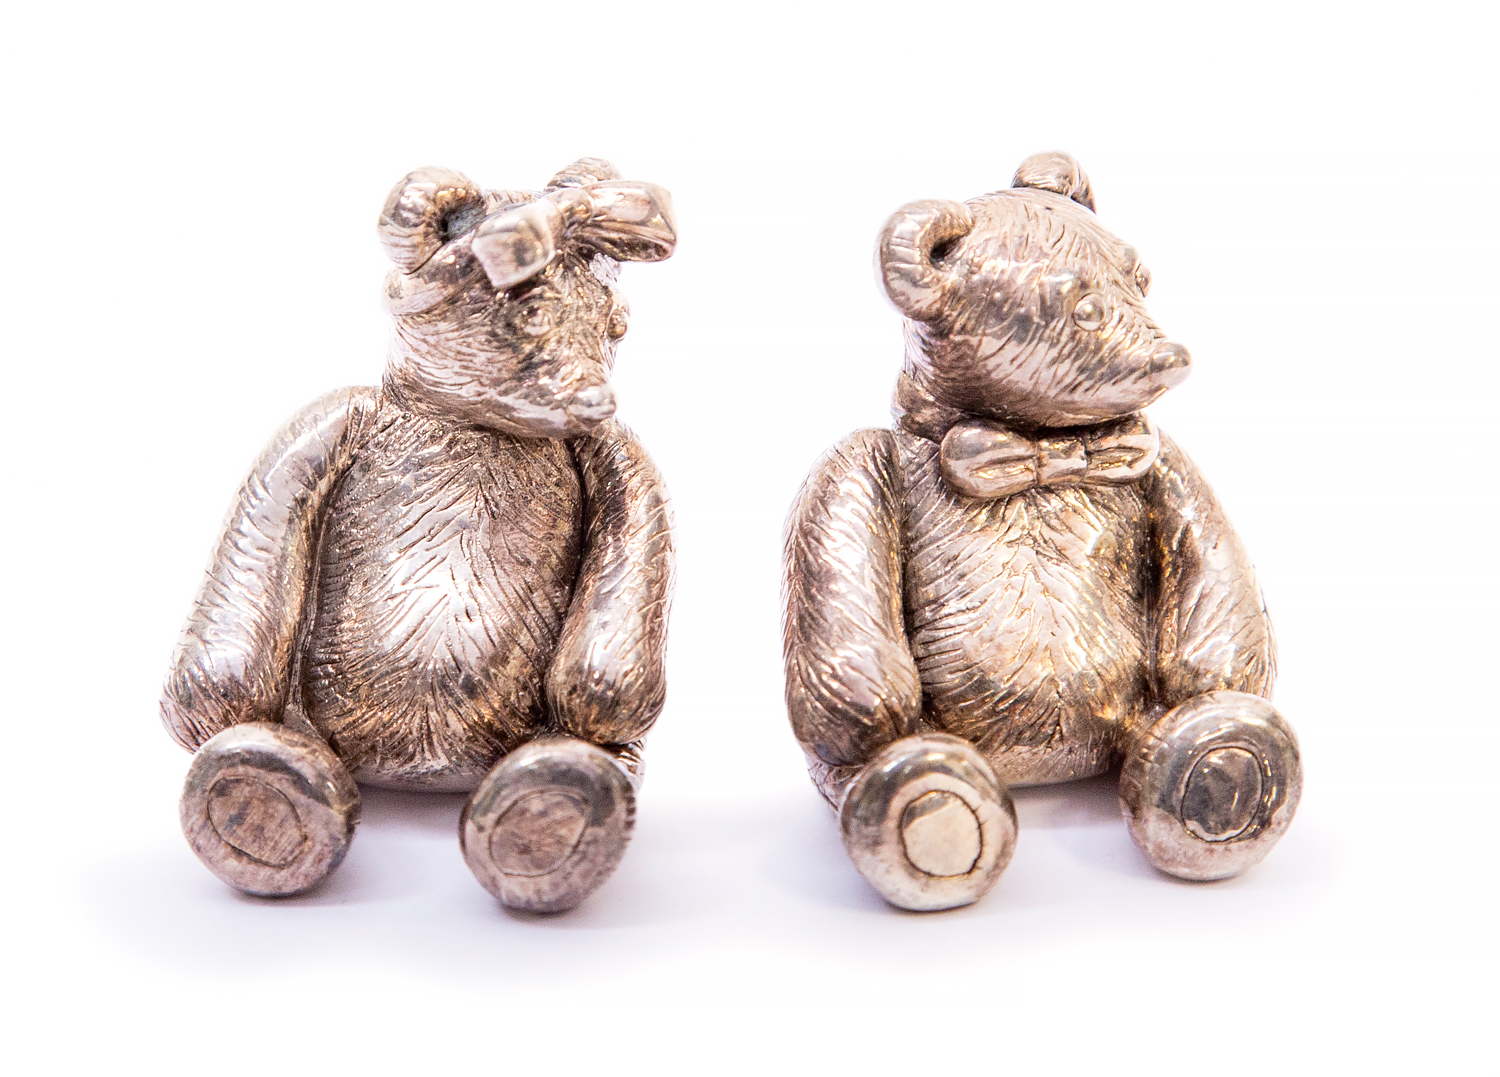 A pair of filled silver bears